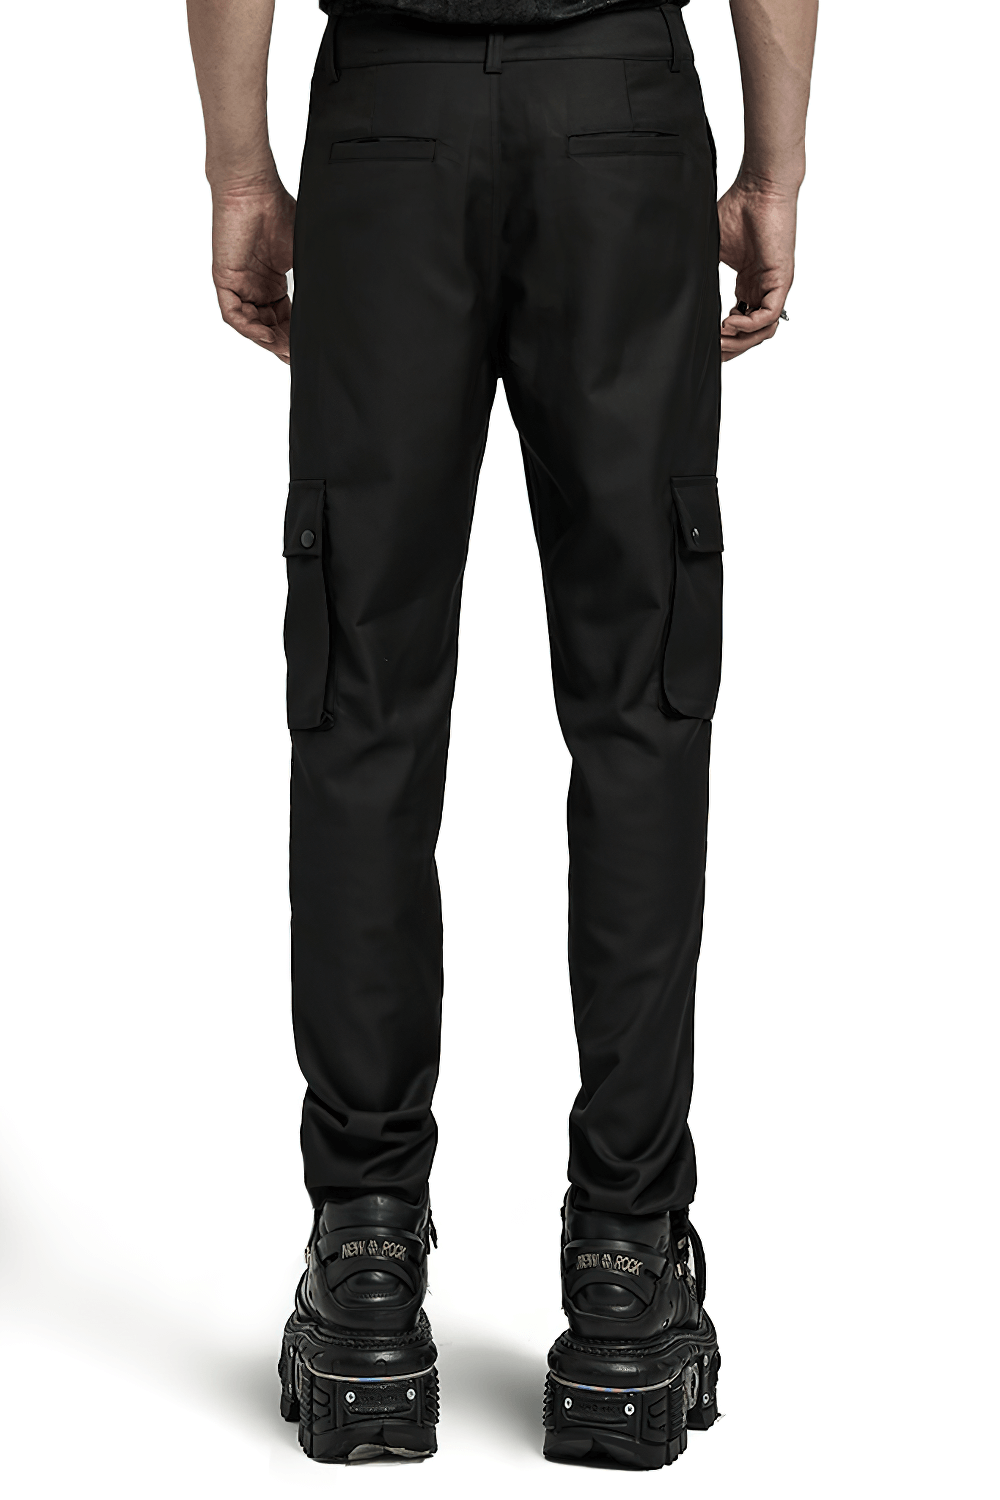 Male Chic Minimalist Cargo Trousers with Side Pockets